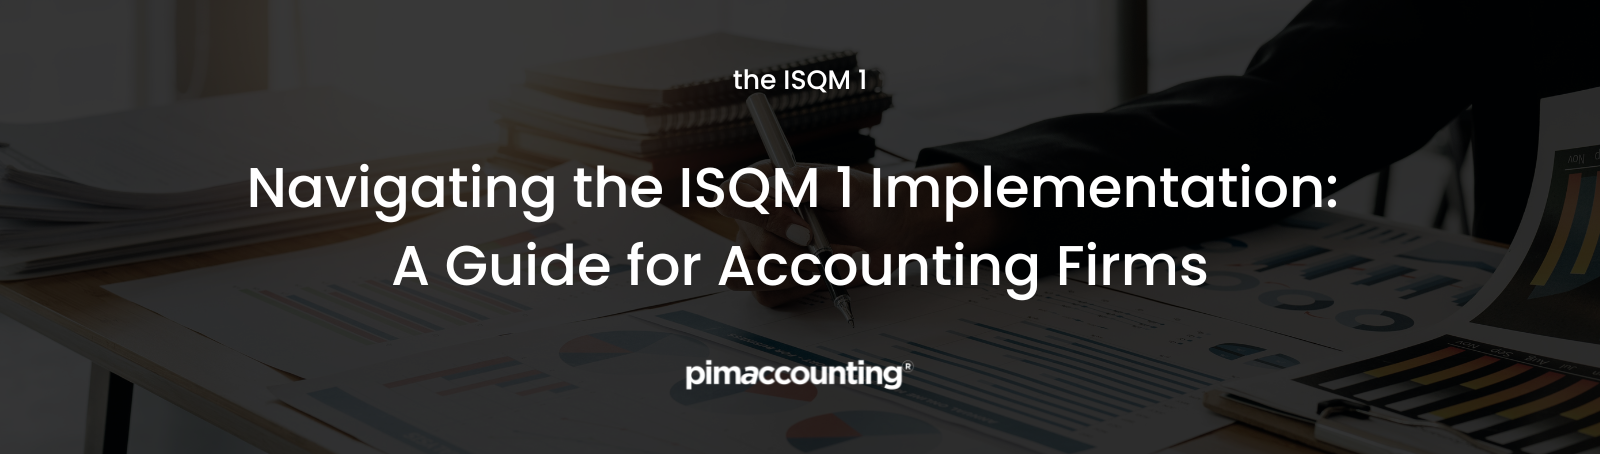 ISQM 1 Implementation: Accounting Firm's Guide